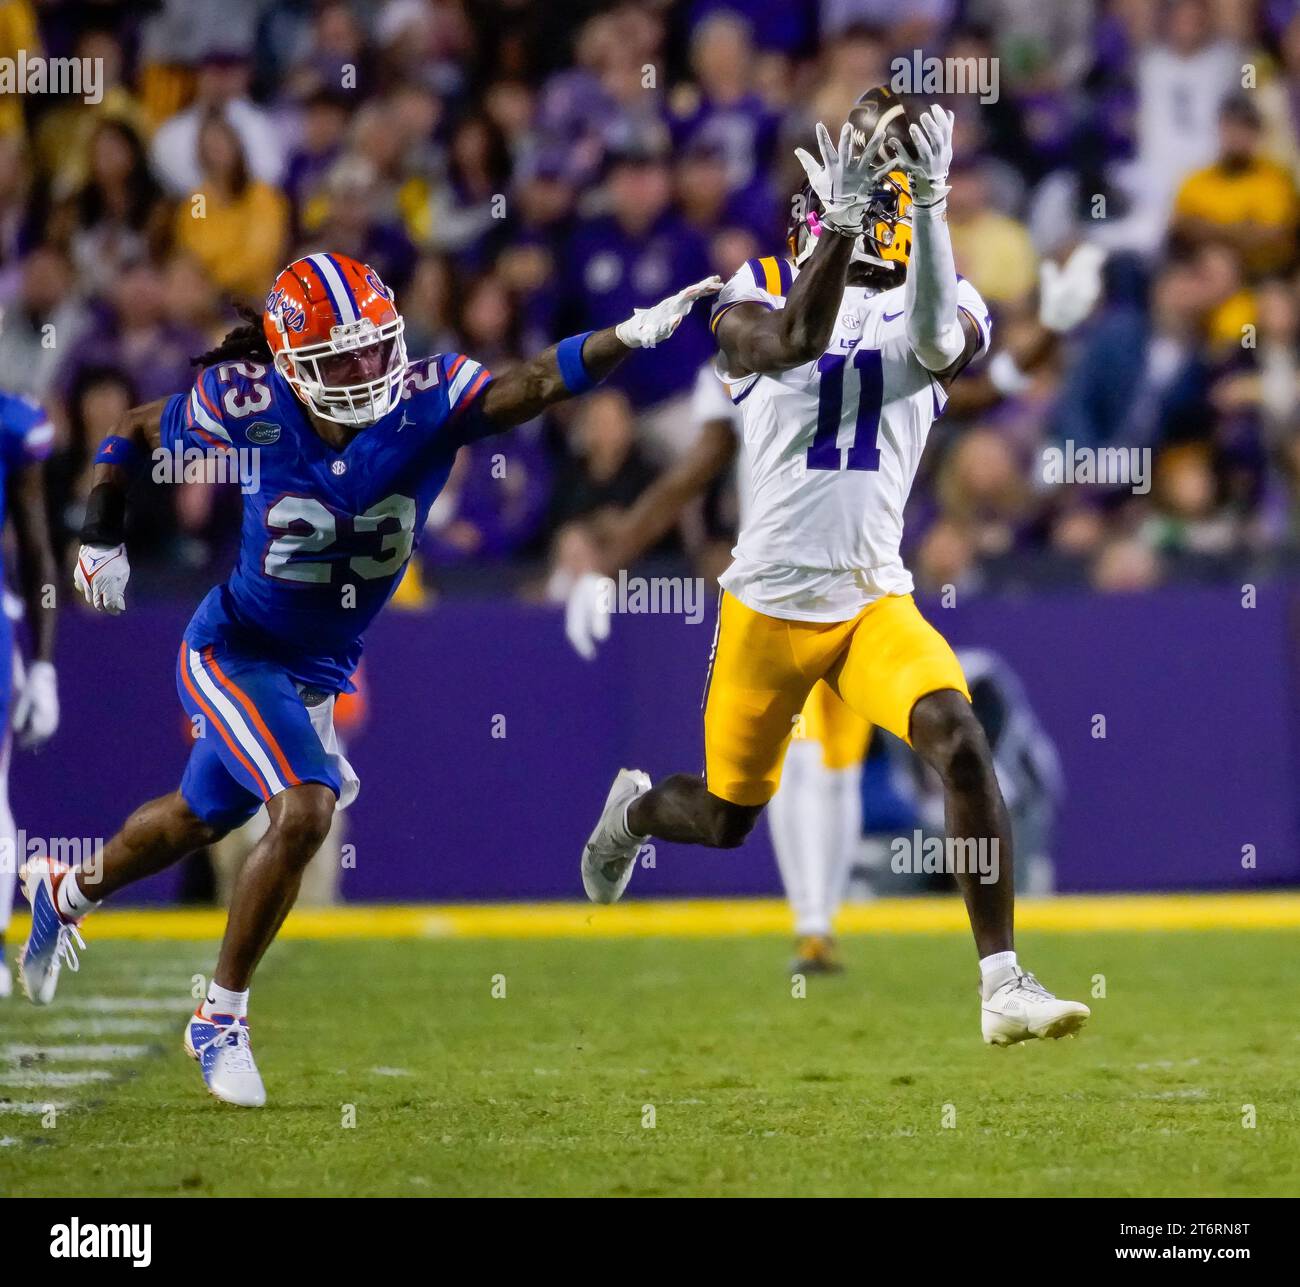 November 11, 2023:LSU Tigers wide receiver BRIAN THOMAS JR. (11) catches a pass in the second quarter during the game between the Florida Gators and the LSU Tigers at Tiger Stadium in Baton Rouge, Louisiana. (Photo by: Jerome Hicks/ Sipa USA) Stock Photo